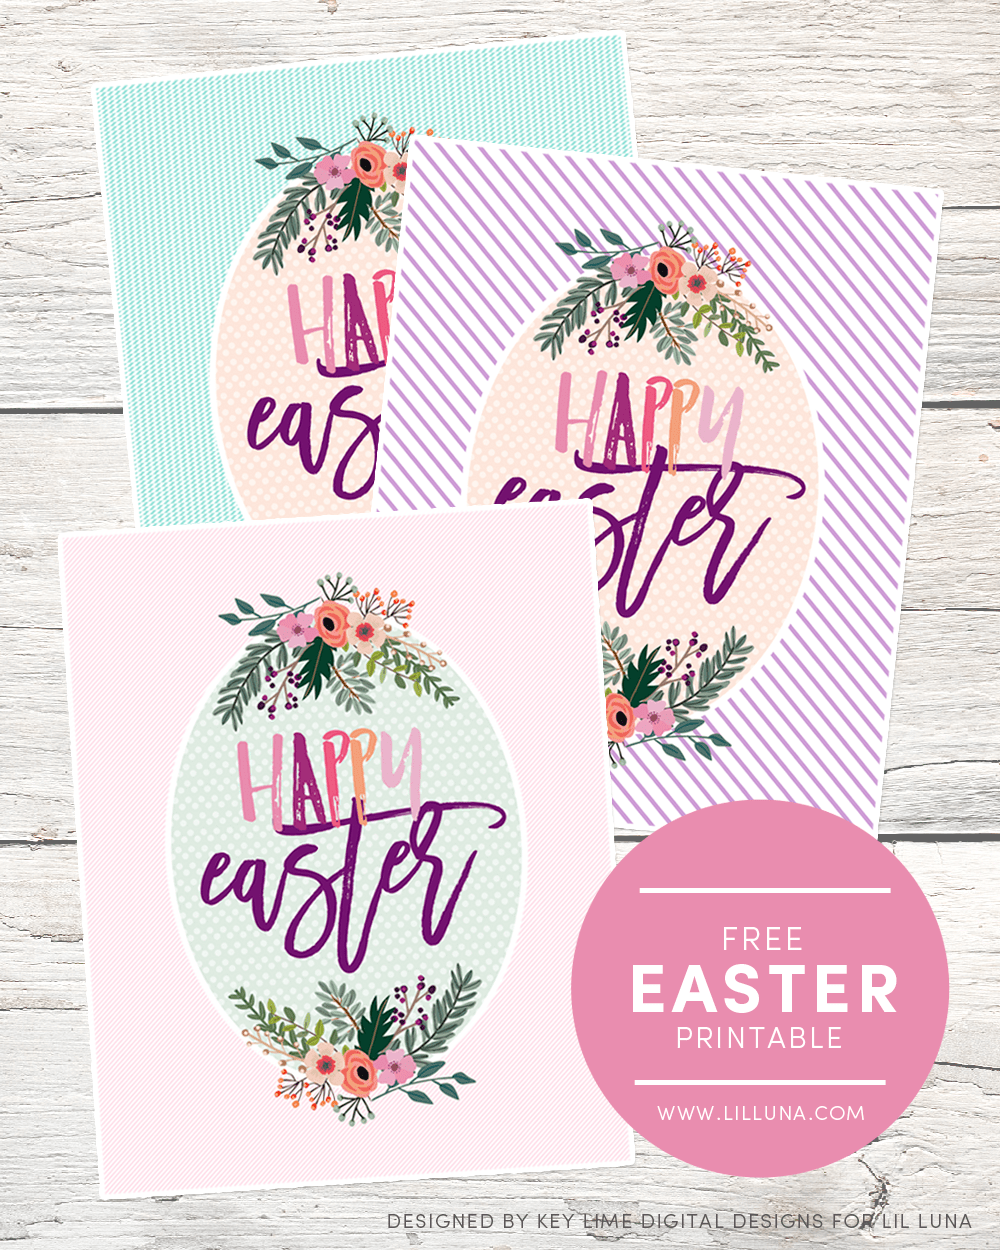 FREE Happy Easter Printables - available to download in 3 colors! This would be great decor, just stick in a frame!